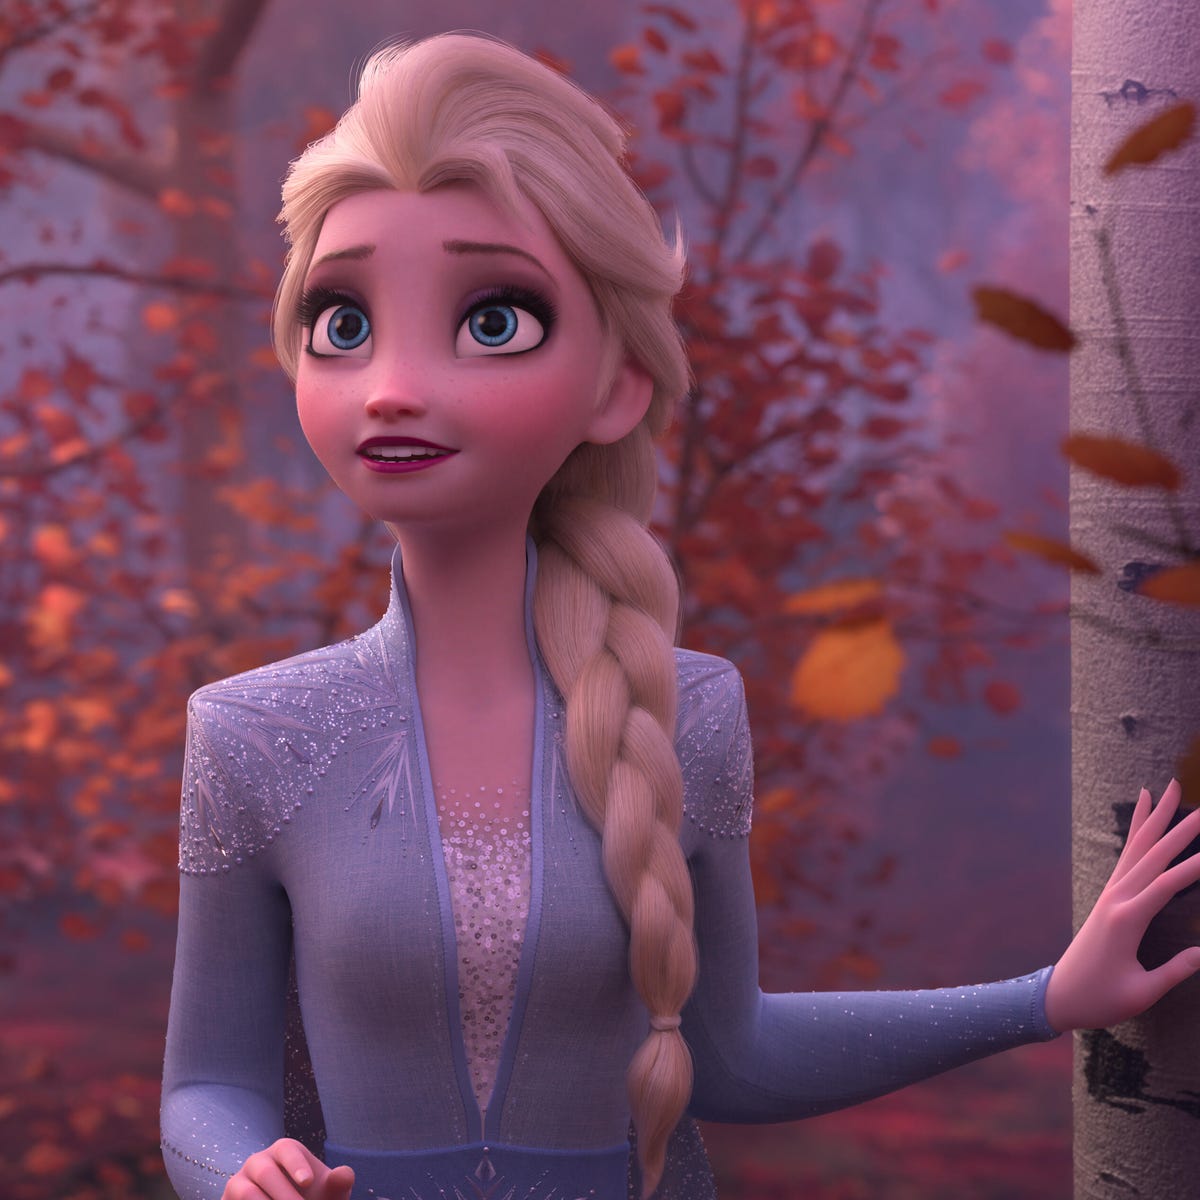 Is Frozen 2 the first Disney movie with an openly gay lead? - CNET